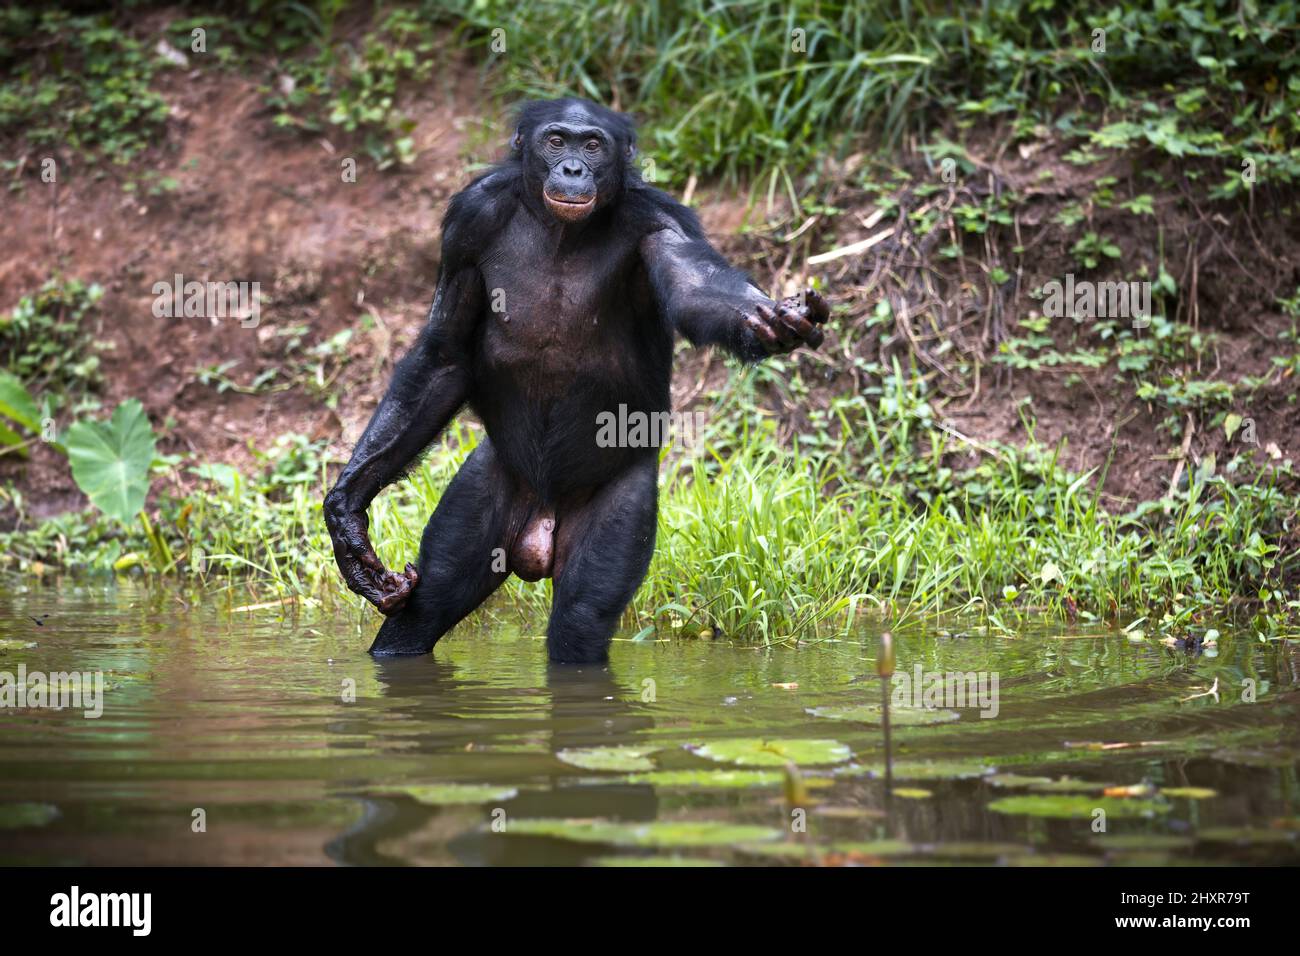 Bonobo monkey fishing in a pond in the Democratic Republic of the